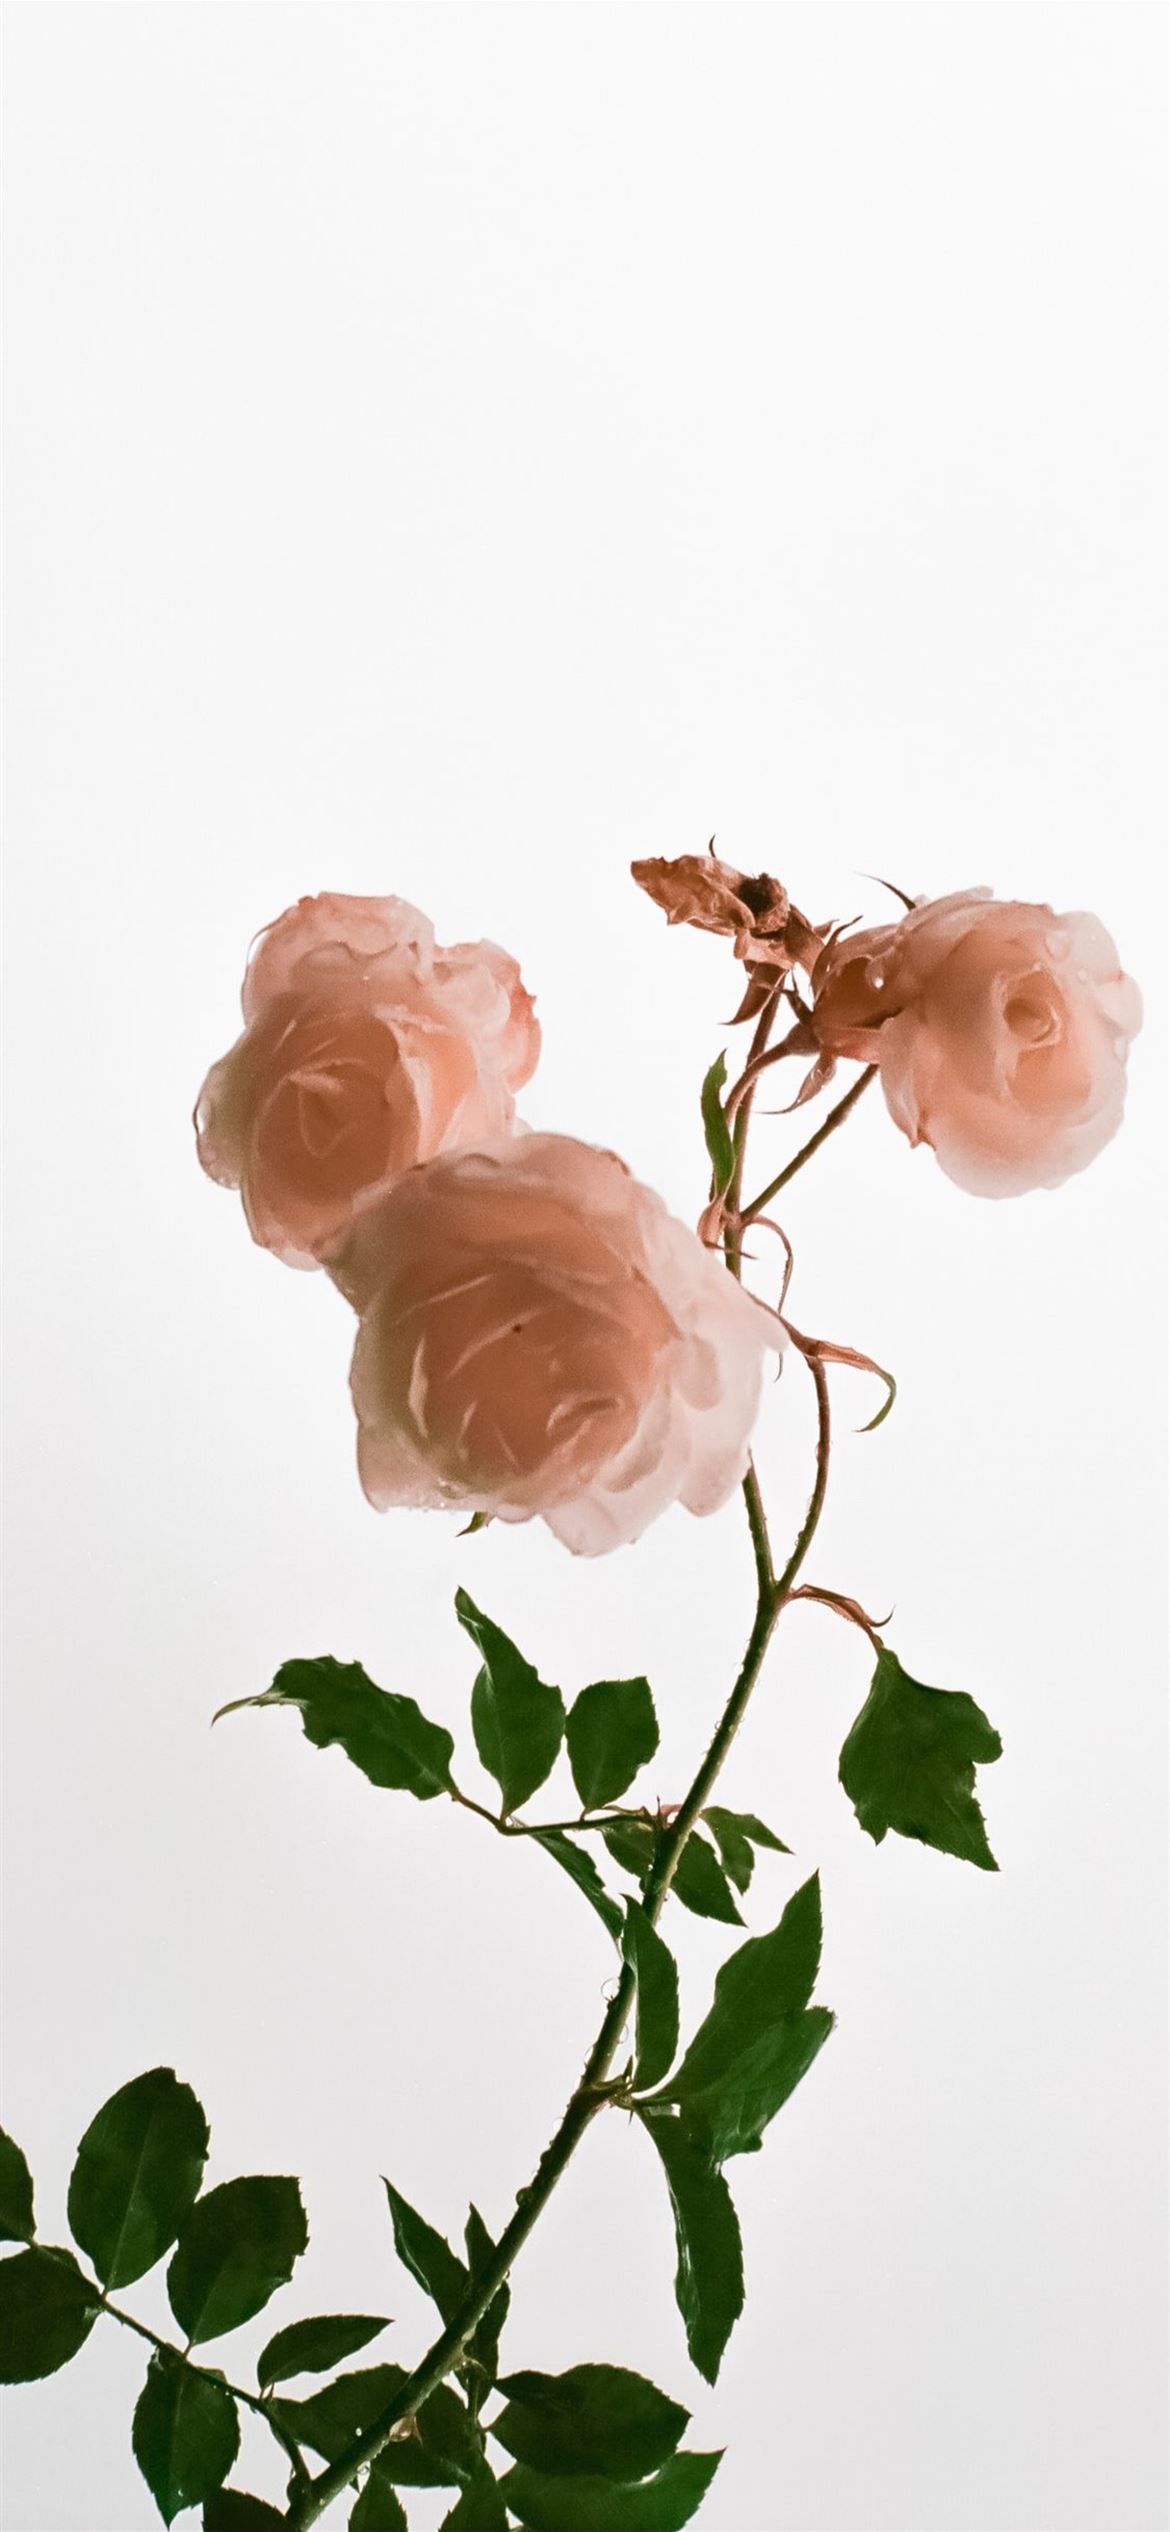 Aesthetic flowers wallpaper for iPhone. - Roses